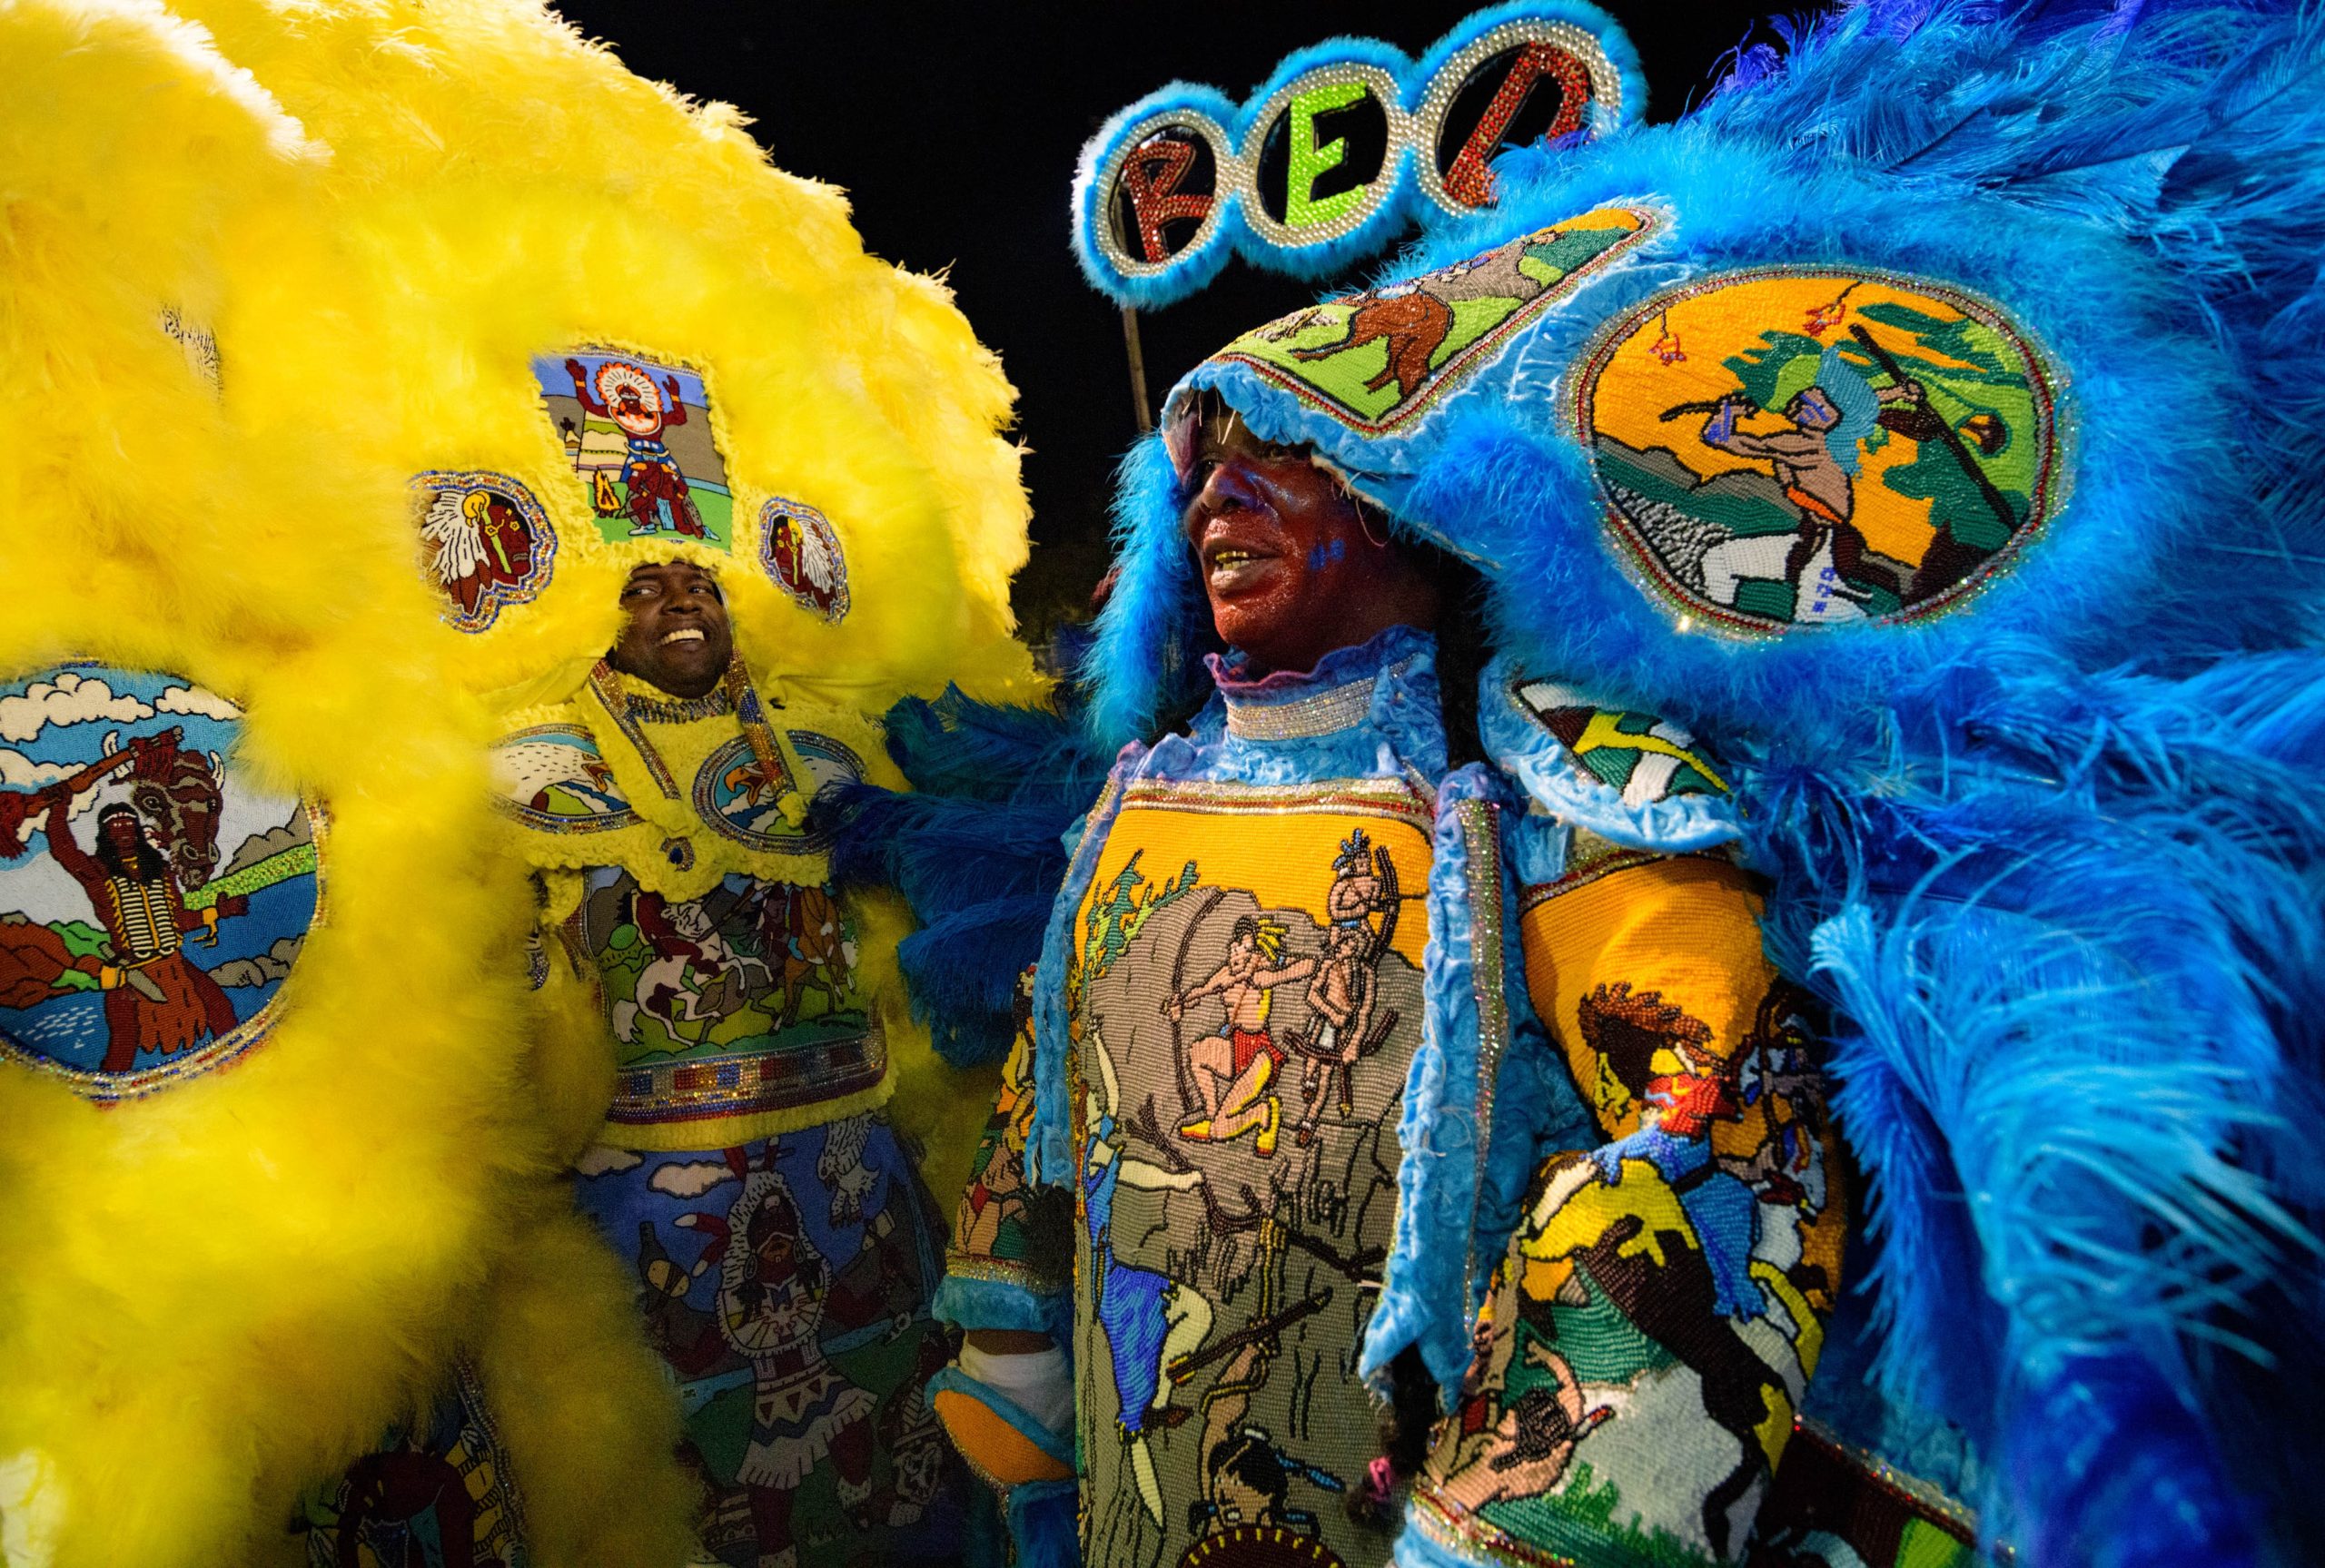 Mardi Gras Indians Big Chiefs meet on St. Joseph's Night in A. L. Davis Park in New Orleans, La. Tuesday, March 19, 2019. Photo by Matthew Hinton